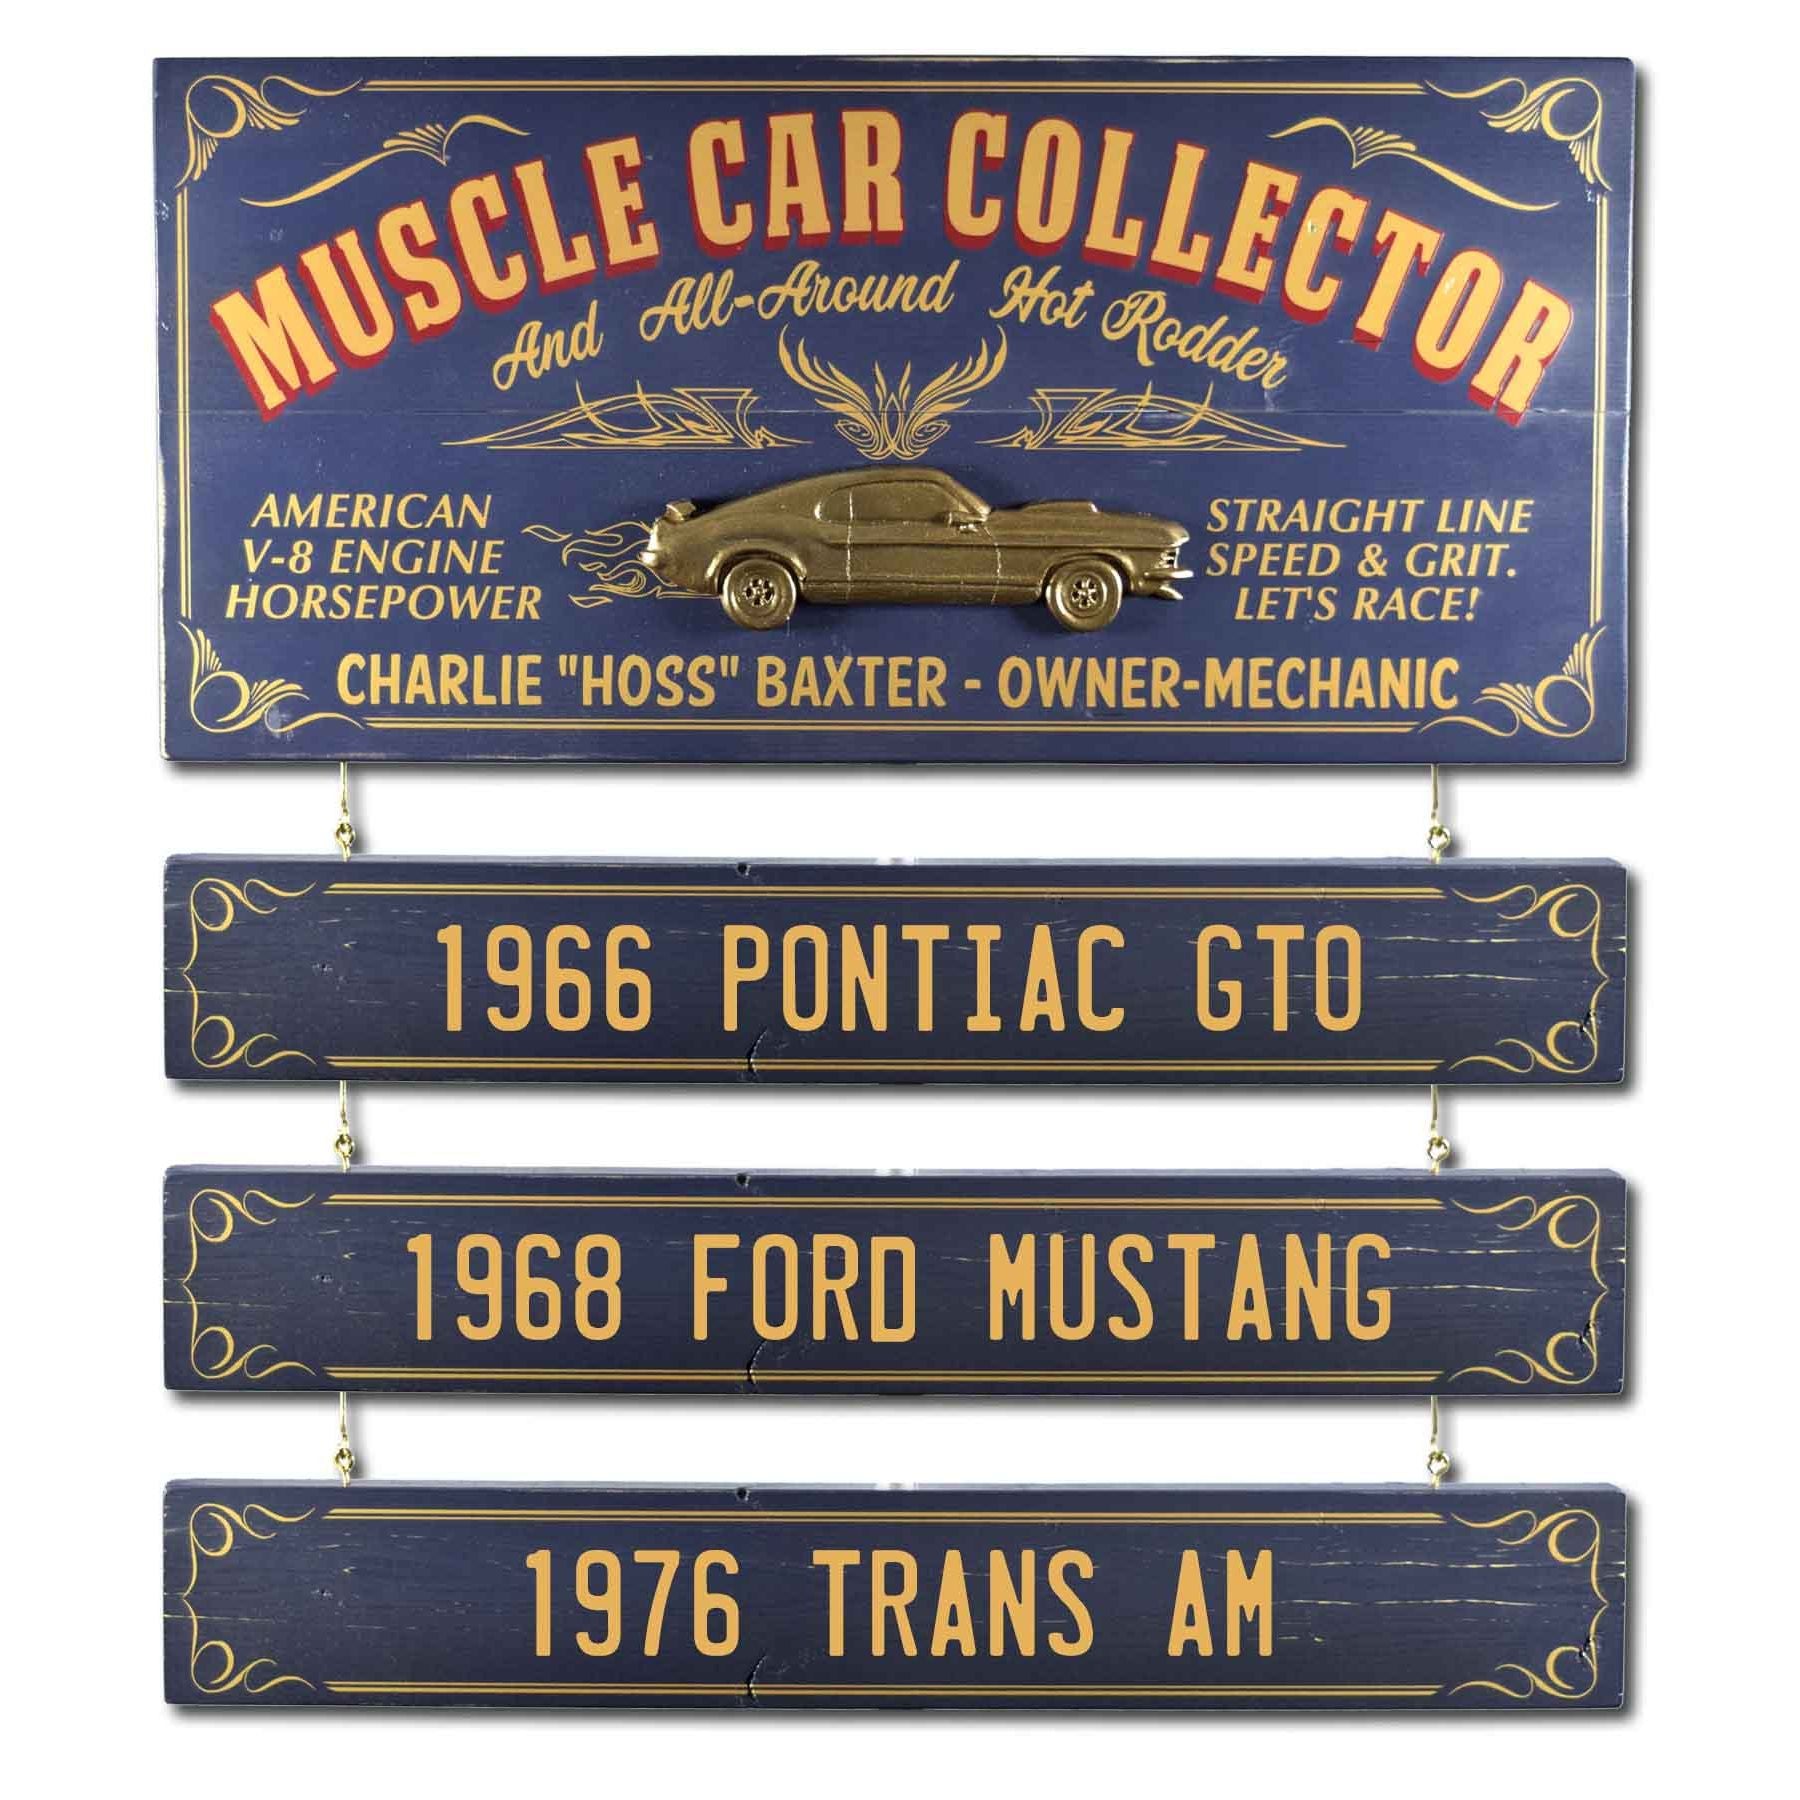 Blue and gold sign for Muscle Car Collector; raised image of car; hanging boards with car names